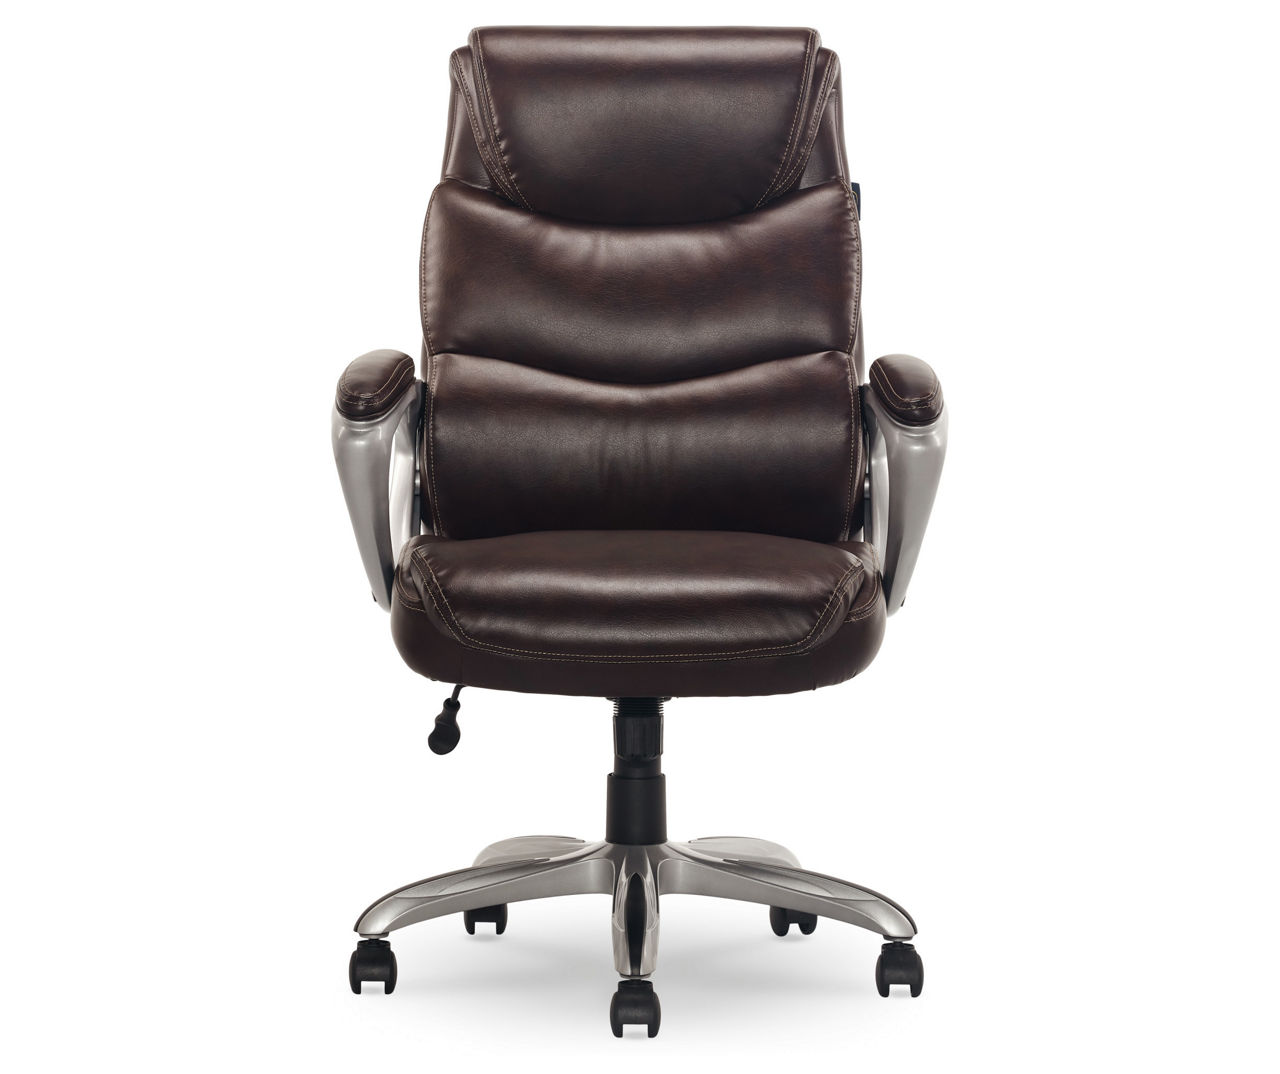 Serta Heavy-Duty Bonded Leather Commercial Office Chair with Memory Foam,  350 lb capacity, Brown